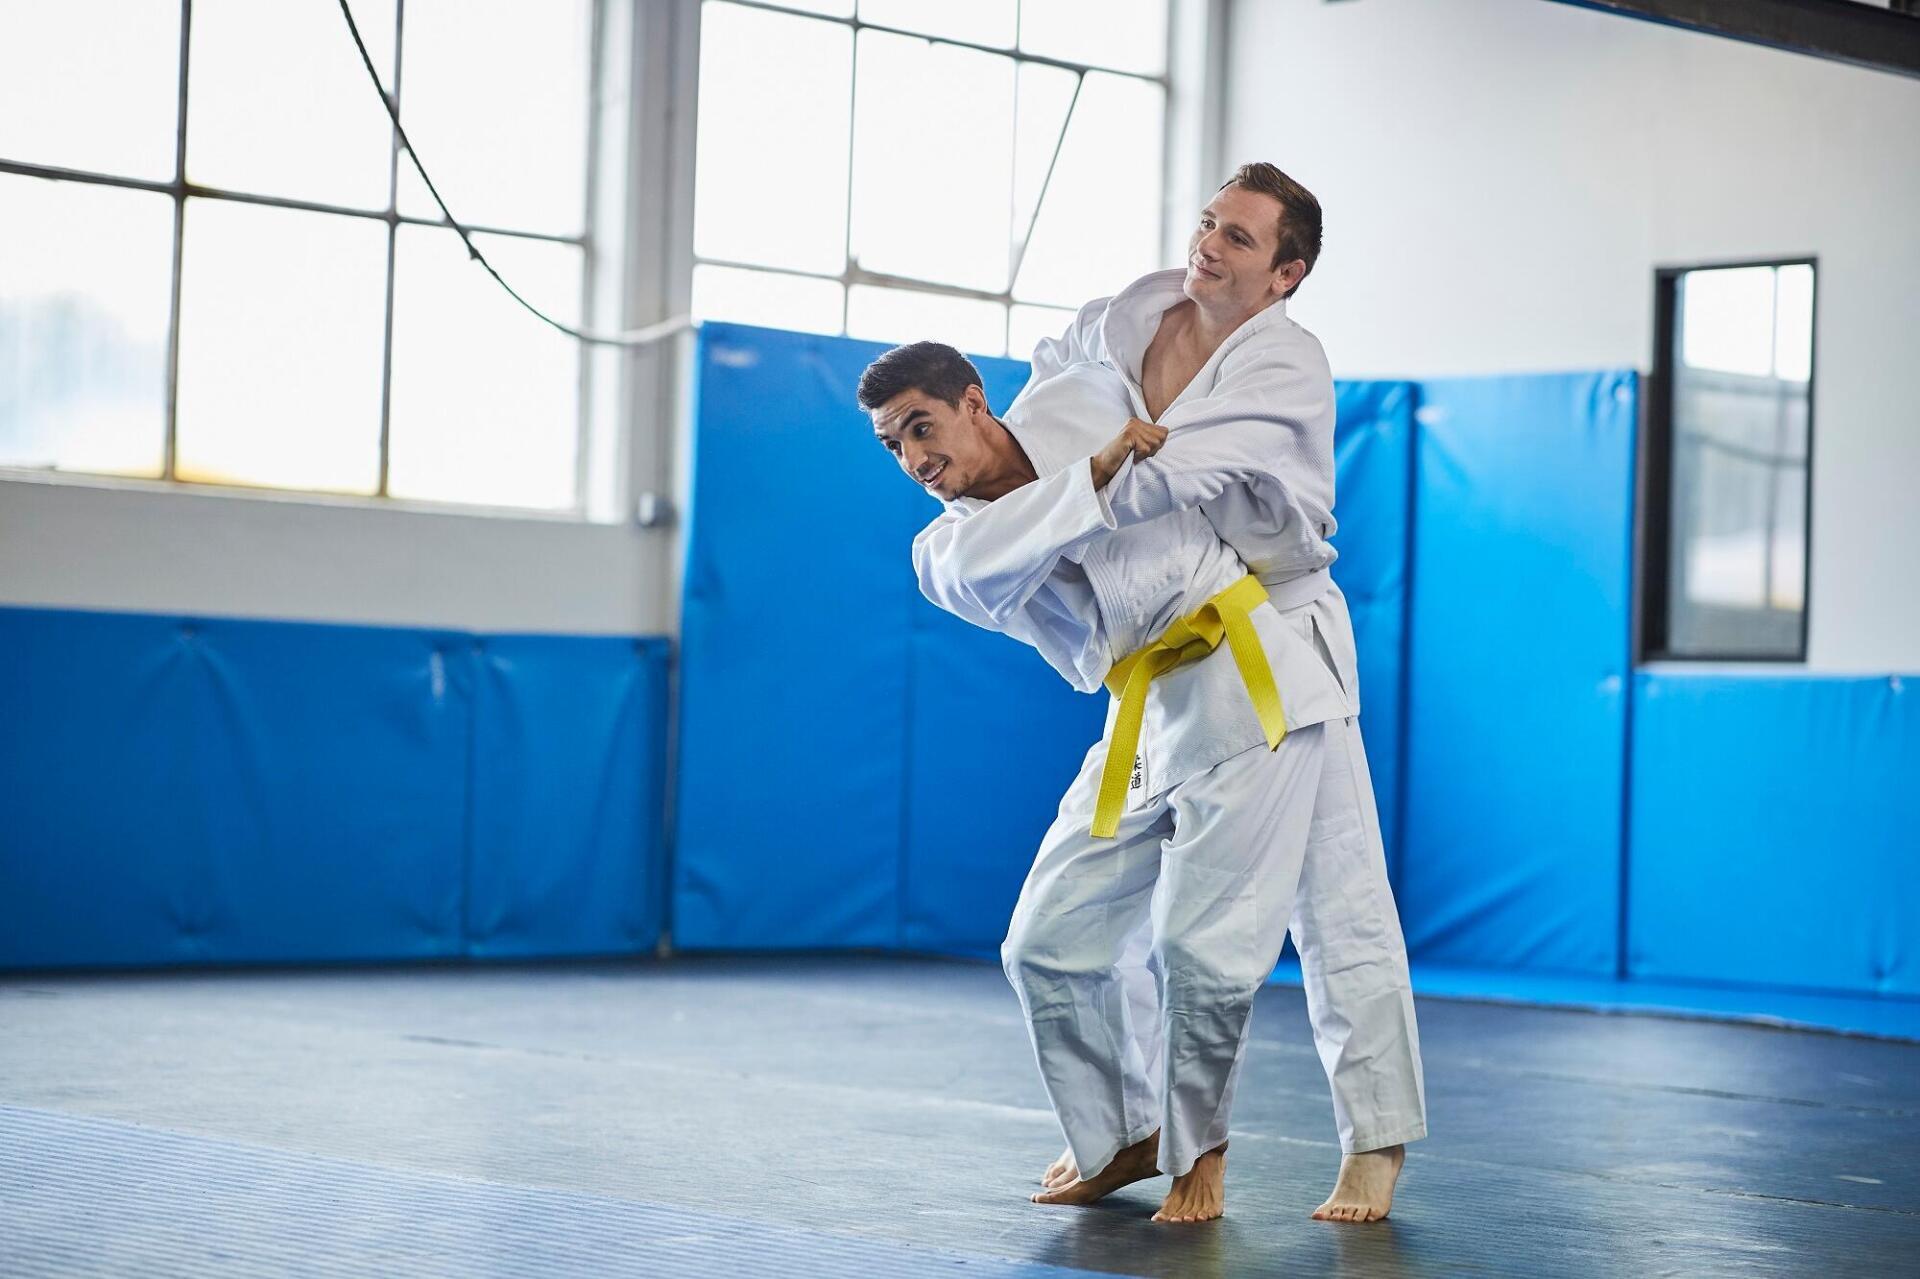 JUDO: A moral code for a lifetime of benefits.